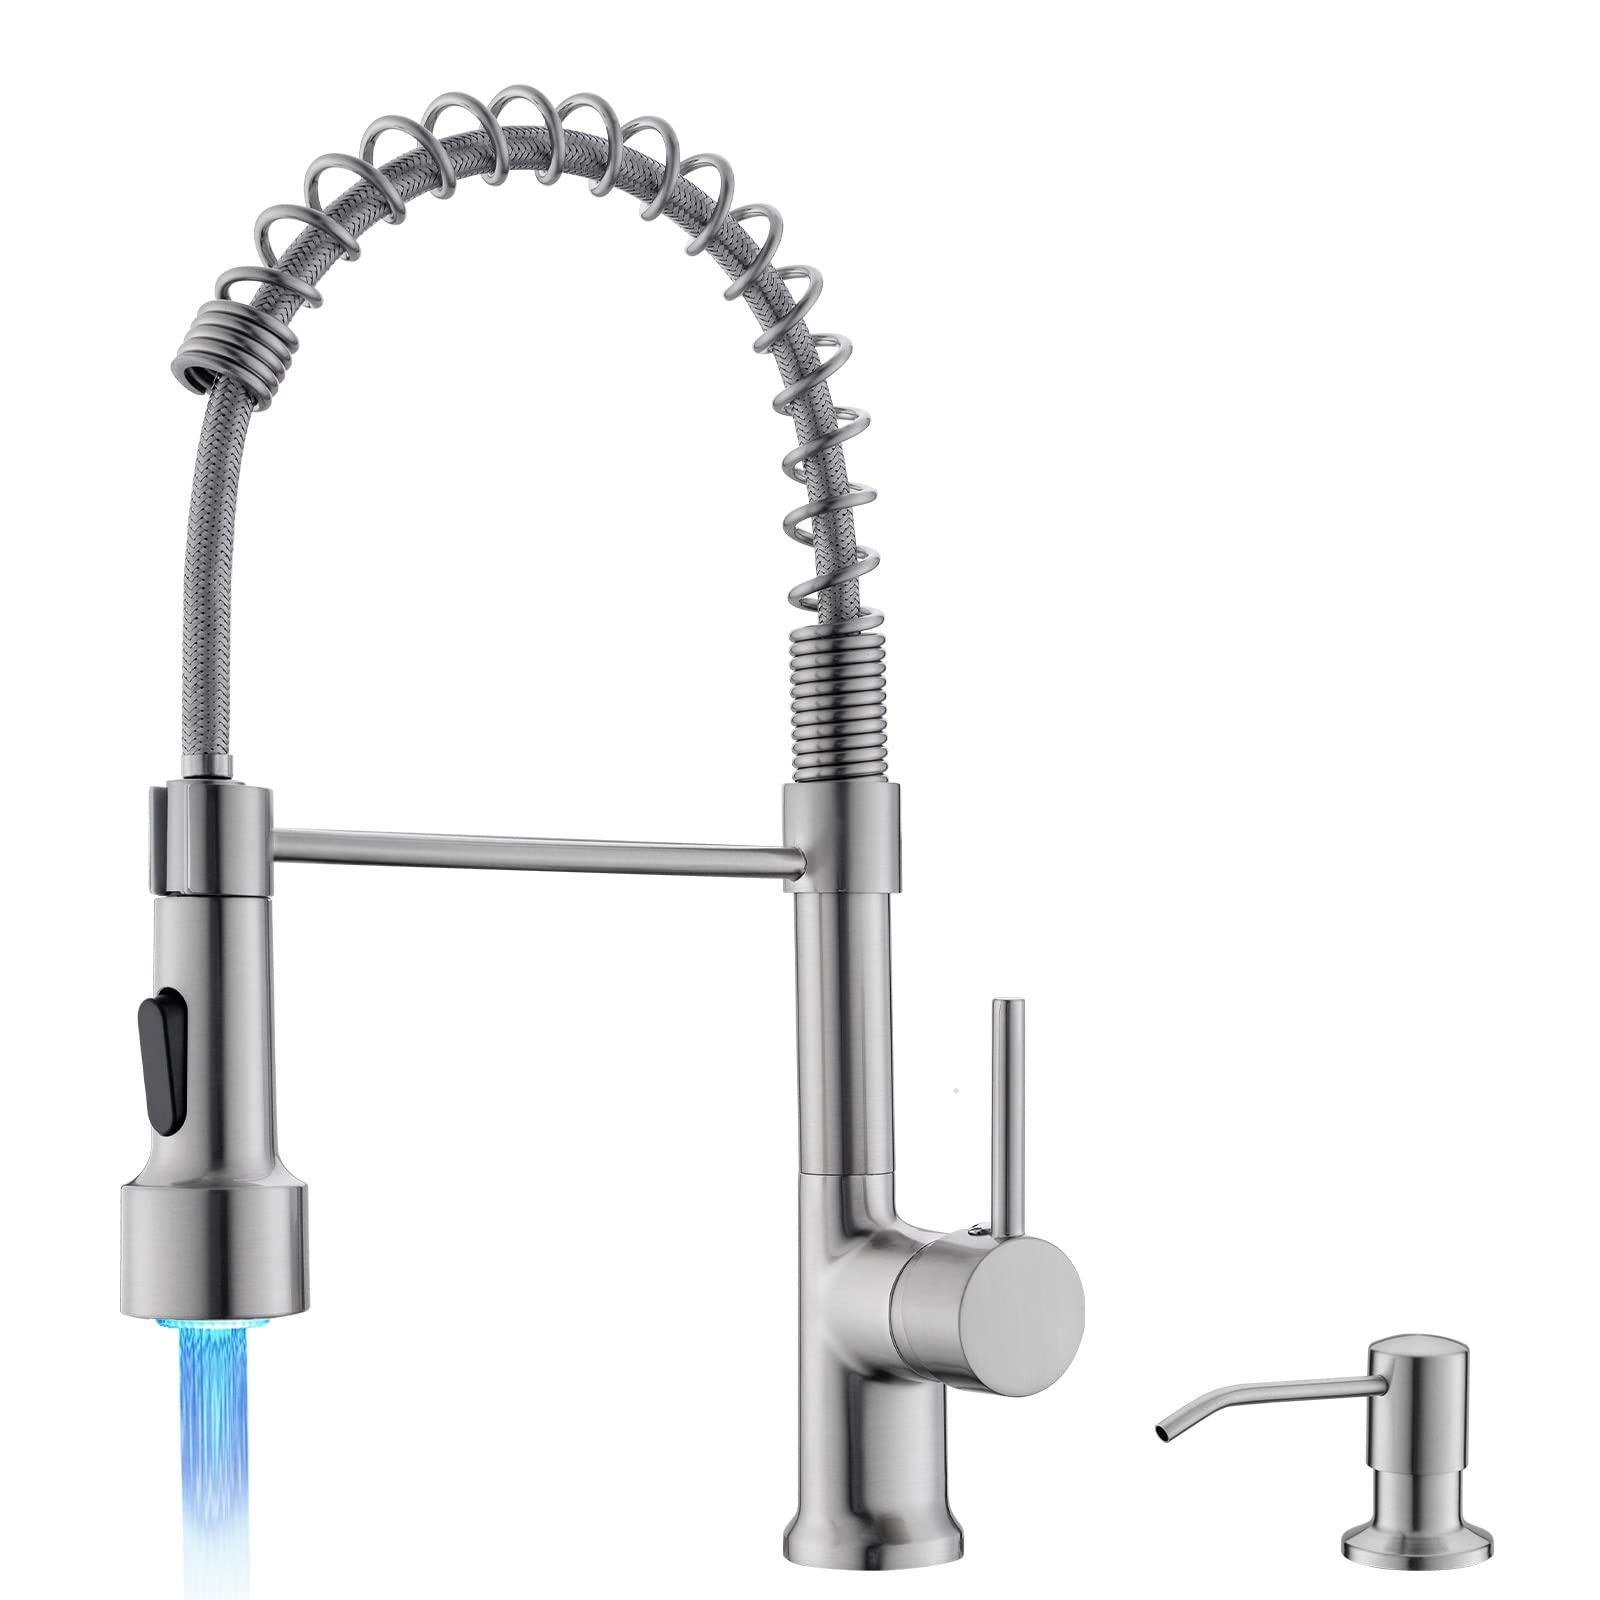 GIMILI LED Kitchen Faucet with Soap Dispenser, Modern Single Handle Spring Kitchen Sink Faucets with Pull Down Sprayer